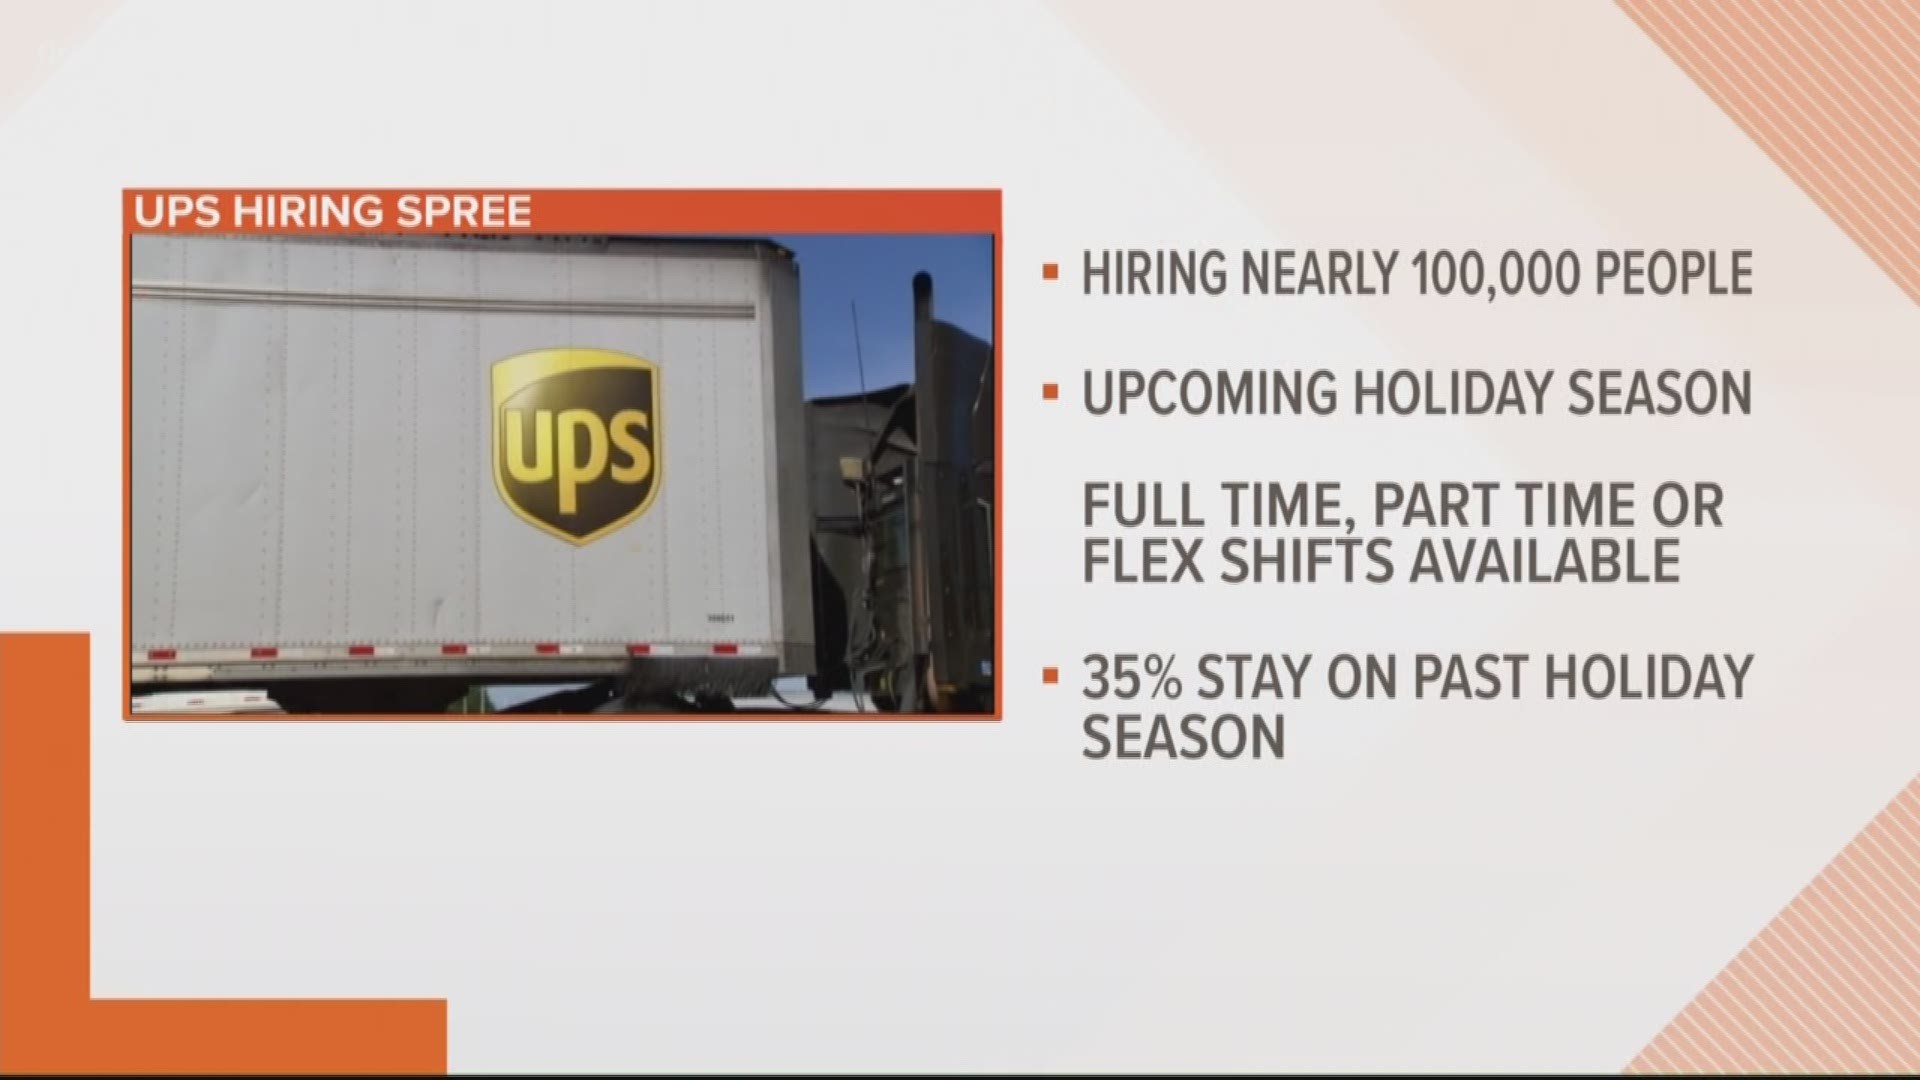 Whether you're looking to earn some extra cash or for a change in career, UPS says their company is the whole package.